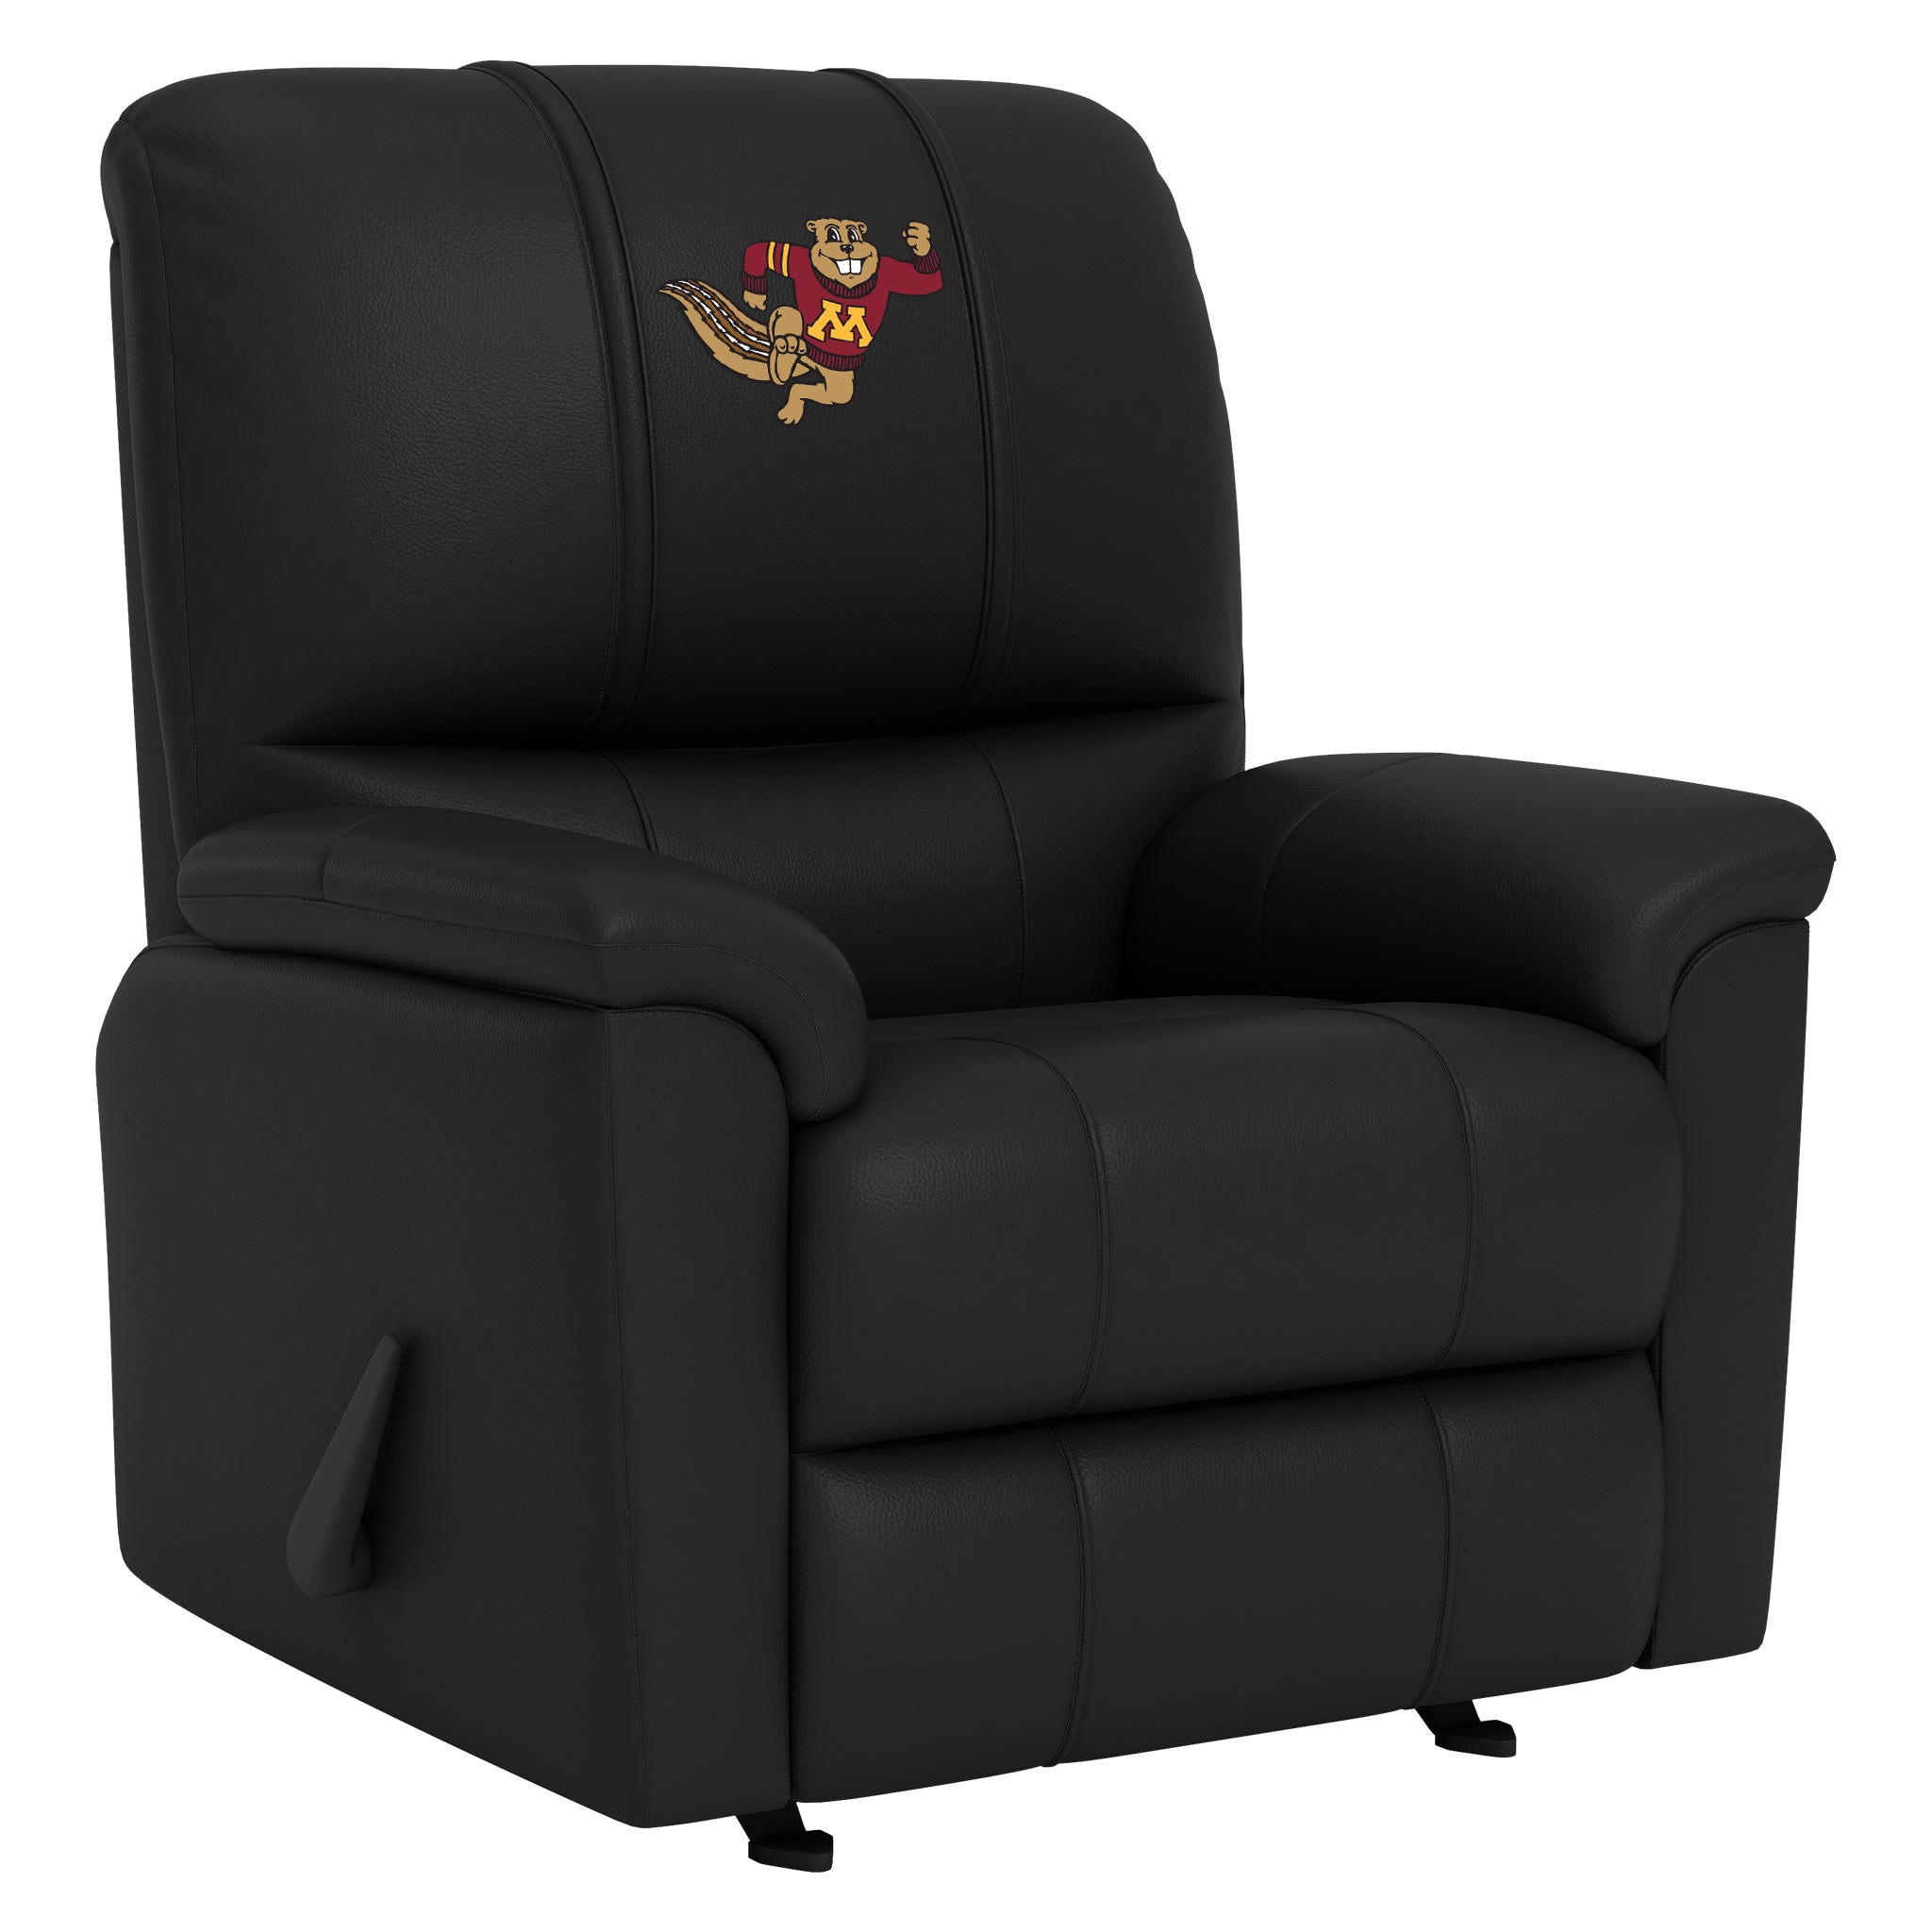 University of Minnesota Silver Club Chair with University of Minnesota Primary Logo